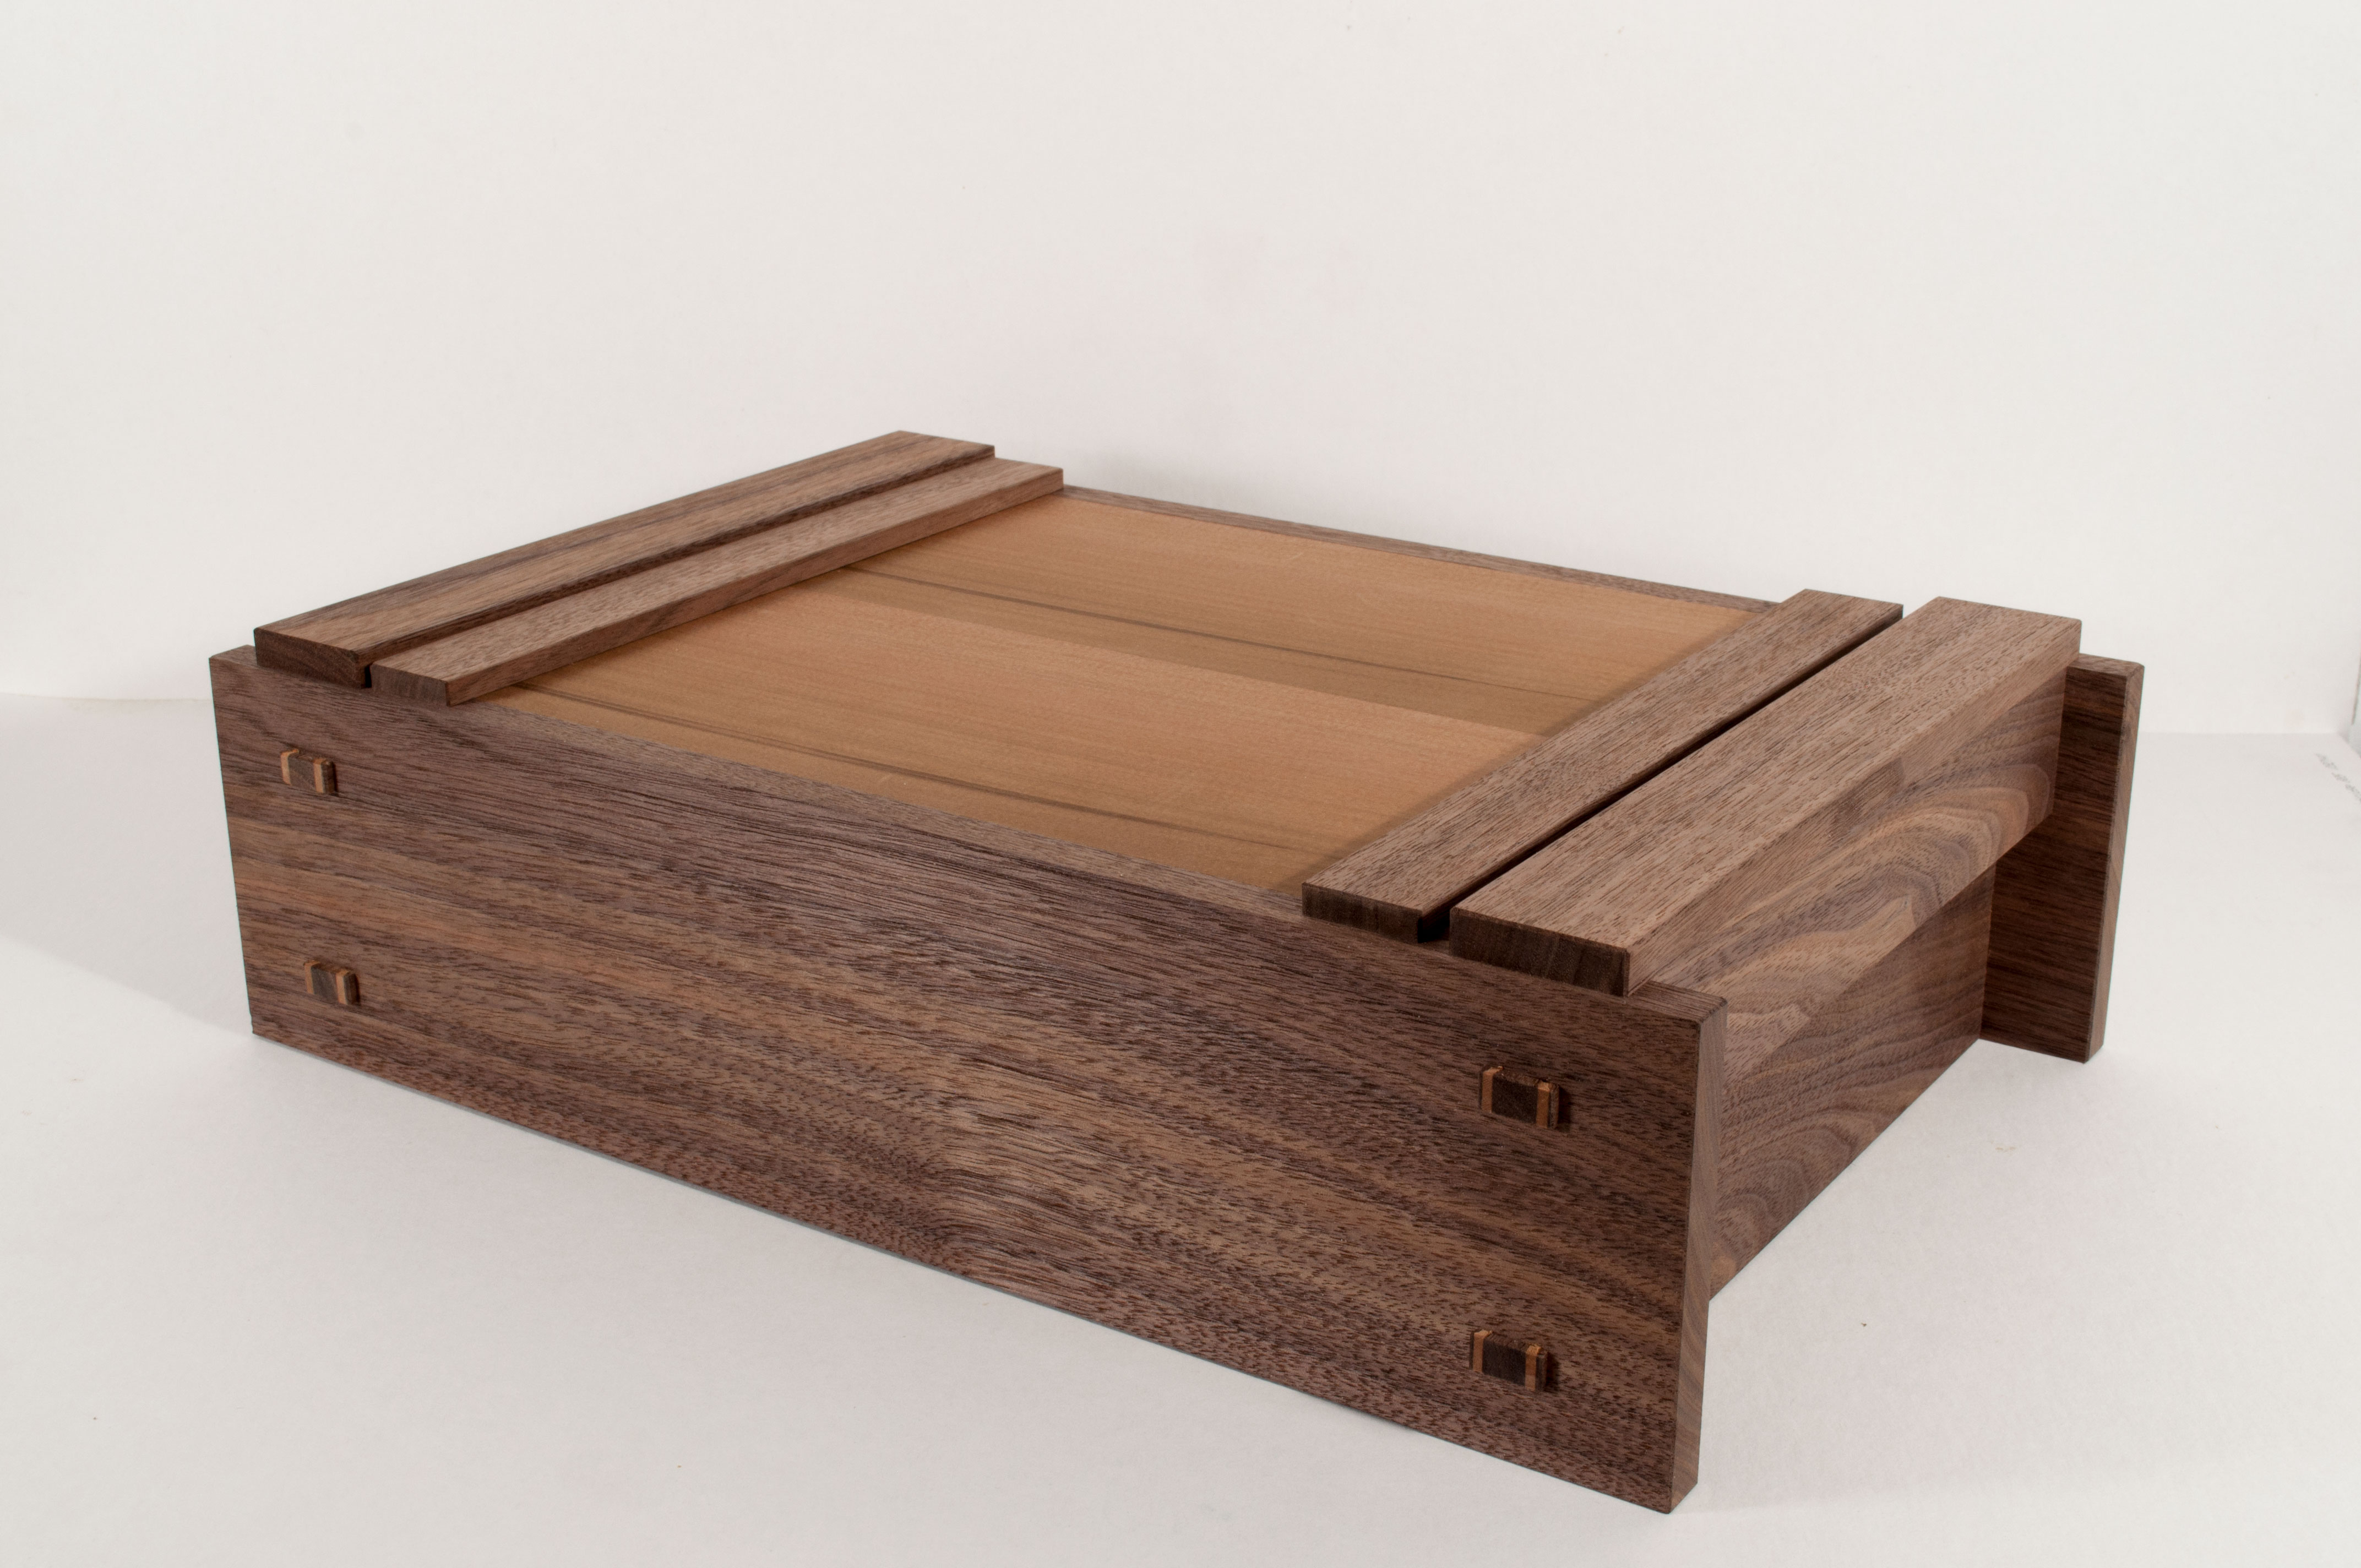 Japanese Boxes - Keepsake Boxes Styled After Traditional ...